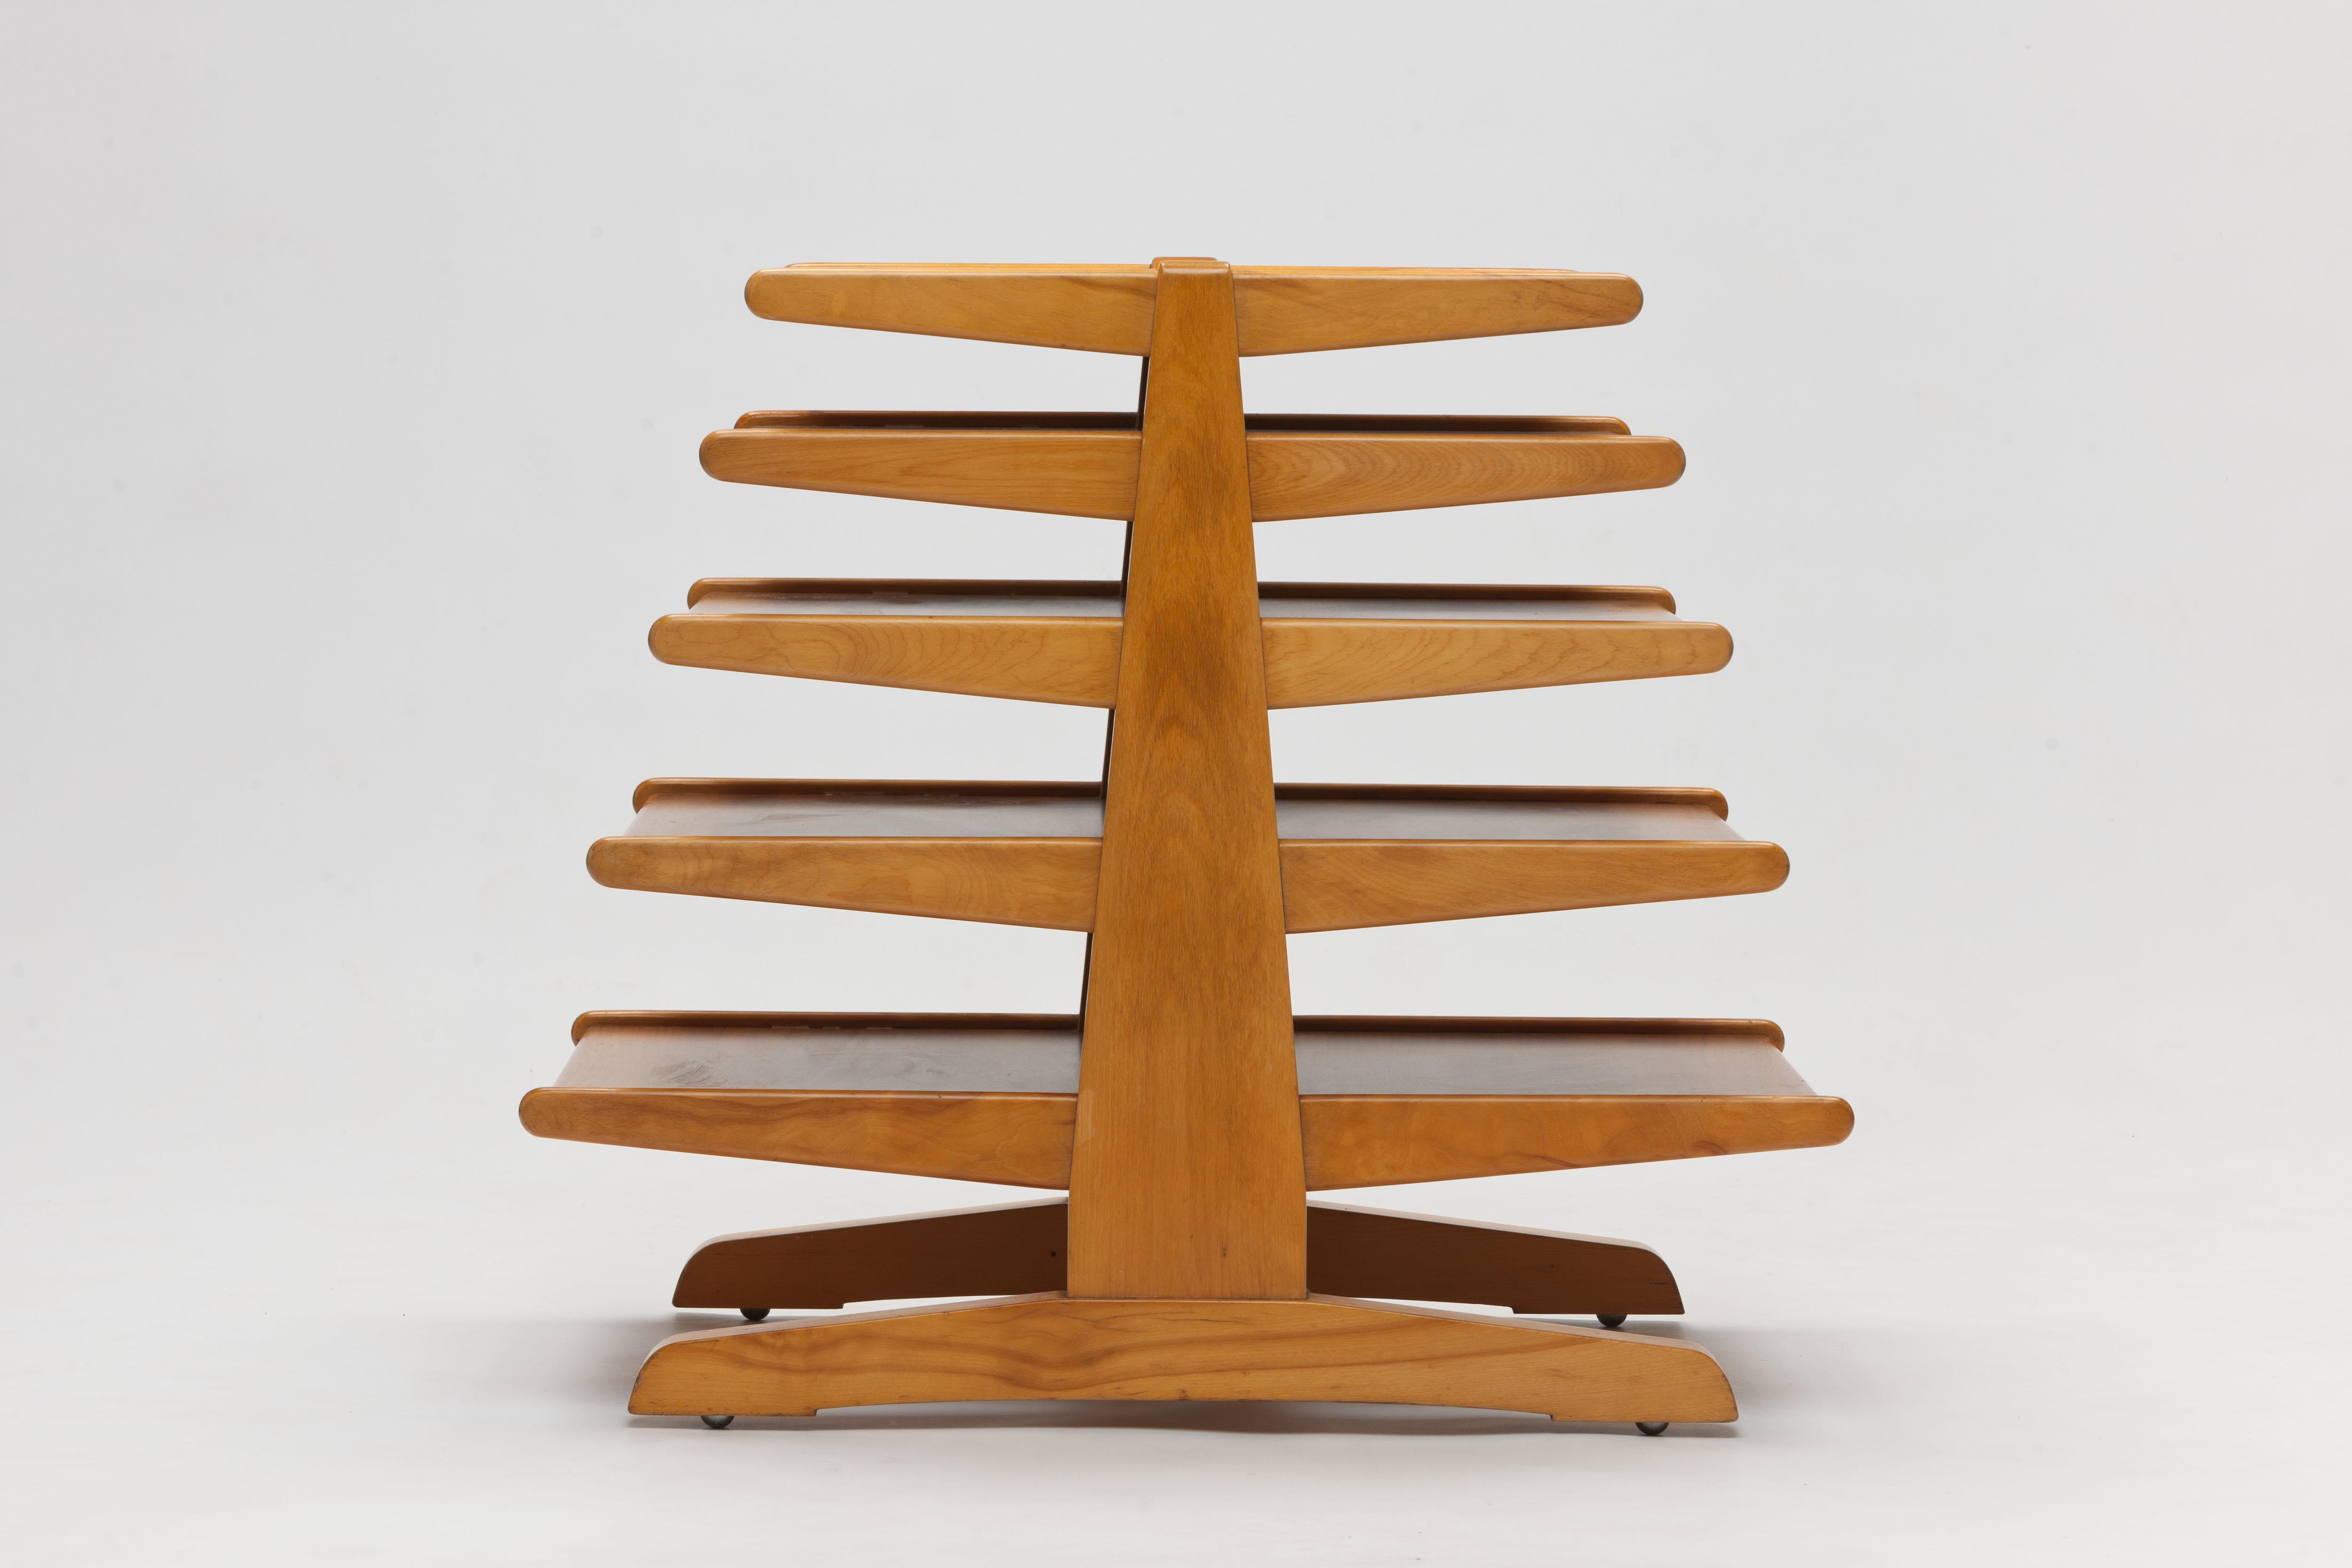 Magazine tree, model 4765 by American designer Edward Wormley executed in birch and sap grain walnut, designed in 1947 for Dunbar Furniture USA. 
A very special, functional and aesthetic small piece of furniture that works powerful in a room as a